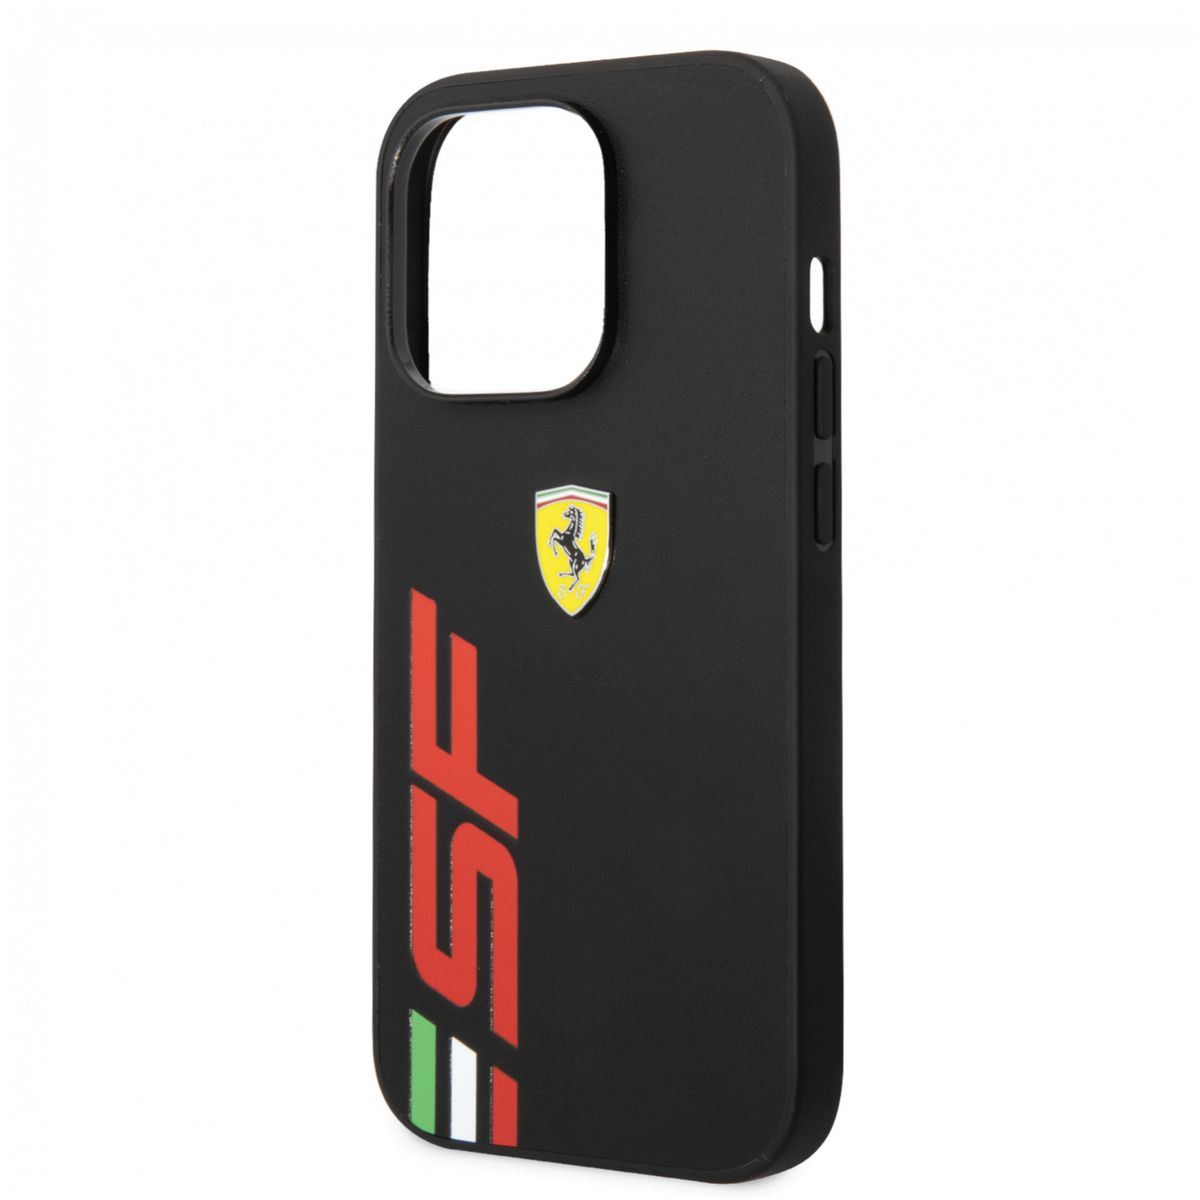 Ferrari PU Leather Case with Printed Big SF Logo for iPhone 14 Pro Max, Black, FEHCP14XPSFK